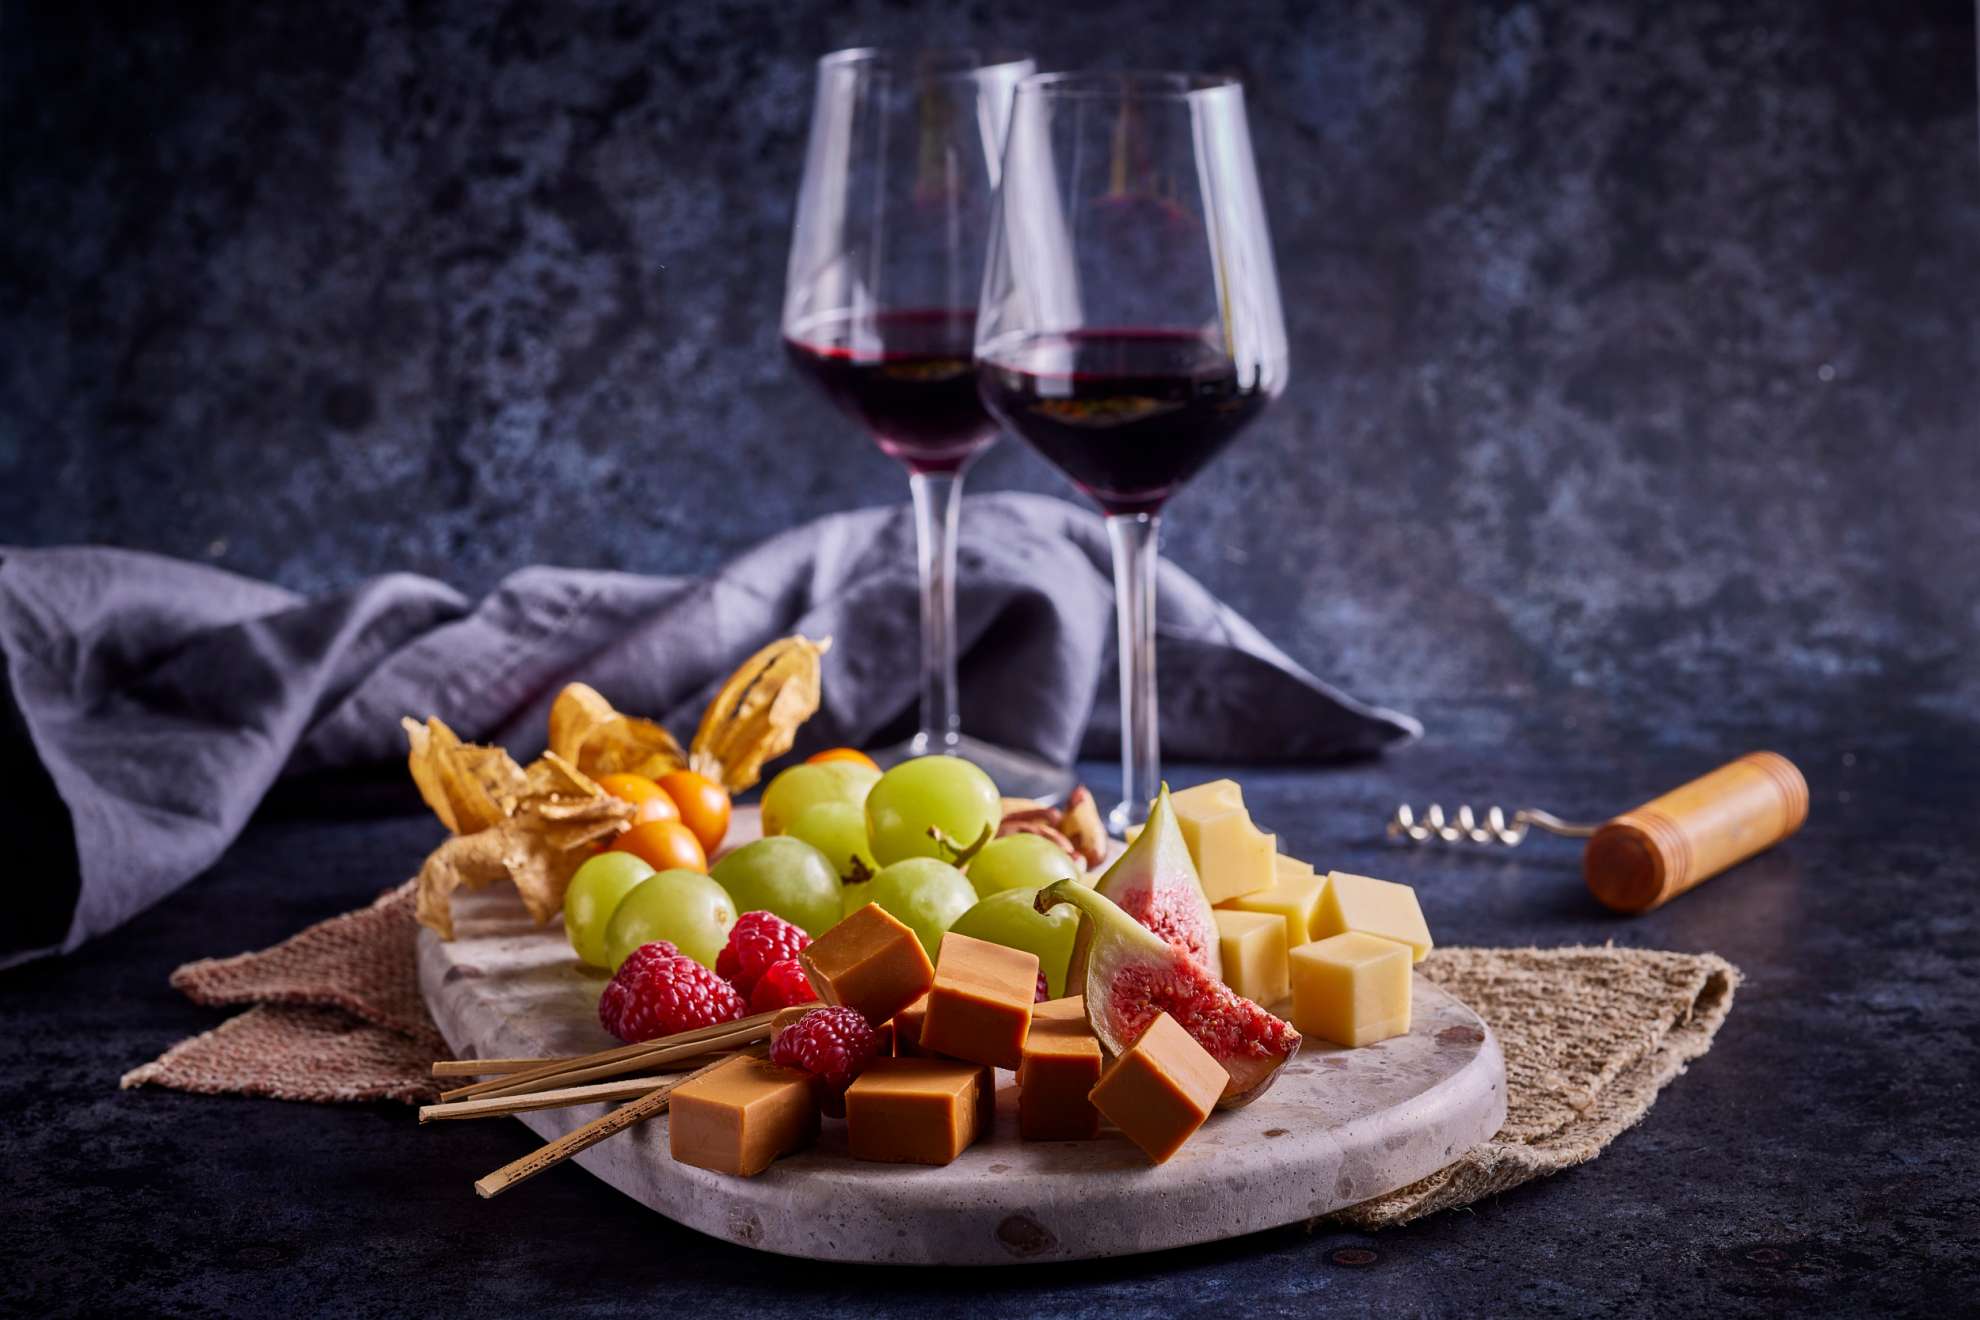 Snacking with wine